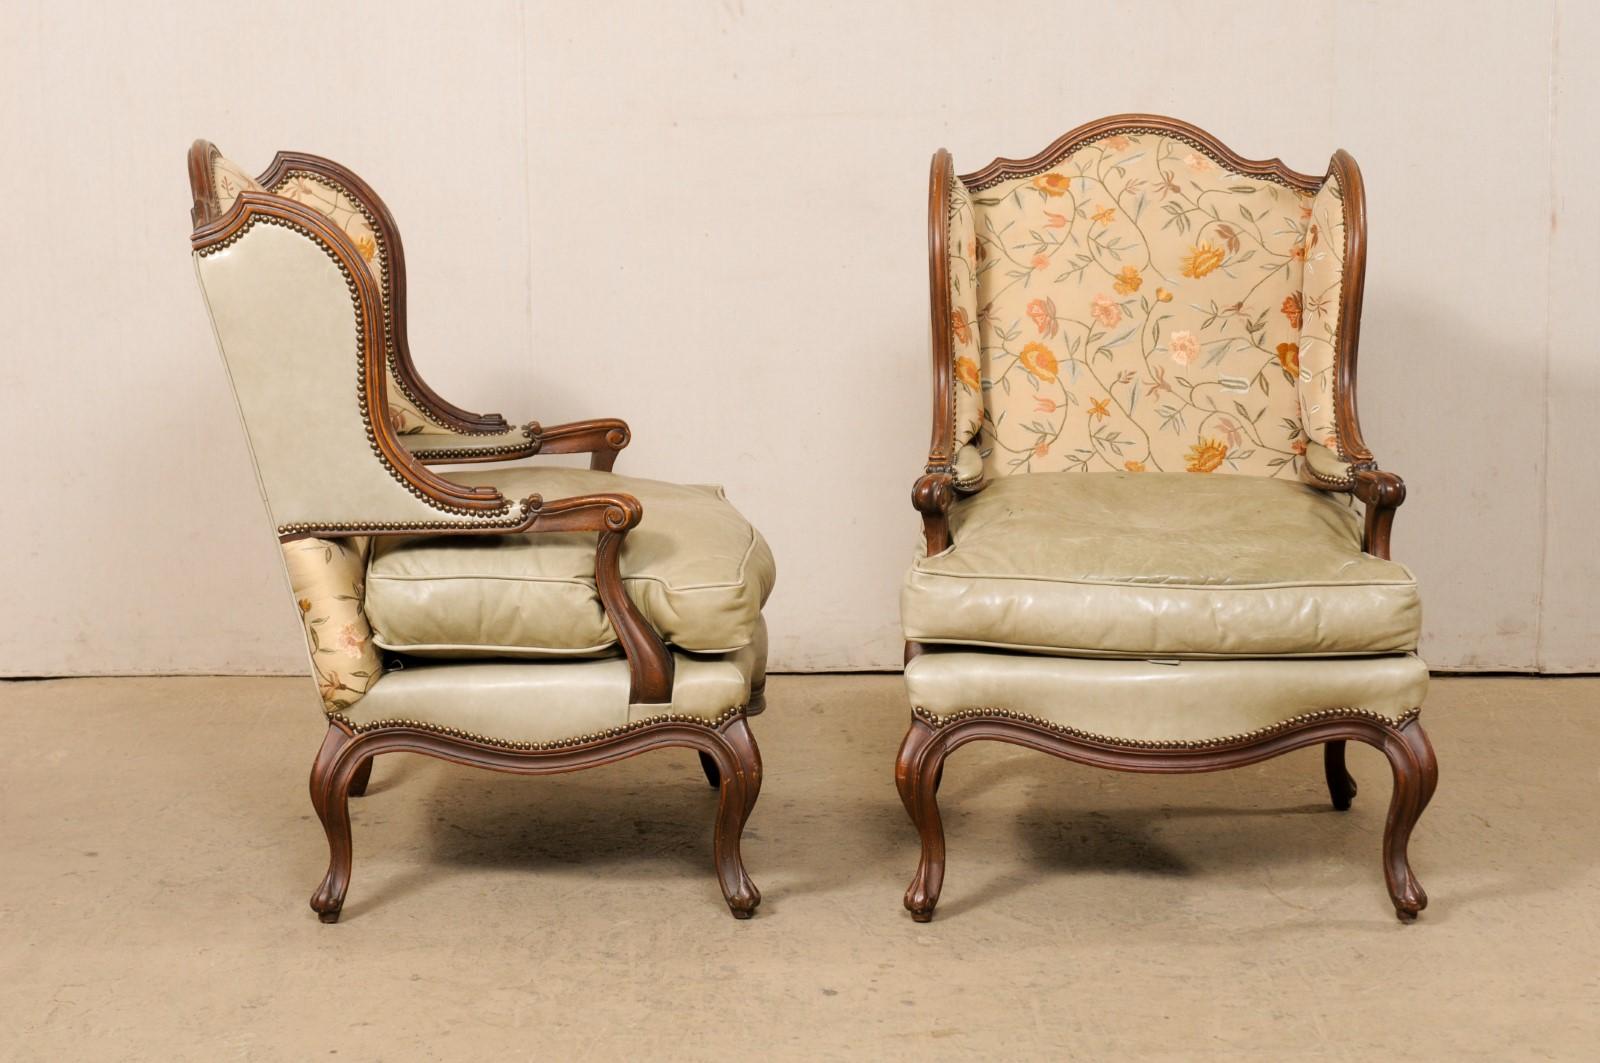 20th Century Pair Nicely-Sized Carved Wood & Upholstered Wing-Back Chairs, Mid 20th C For Sale